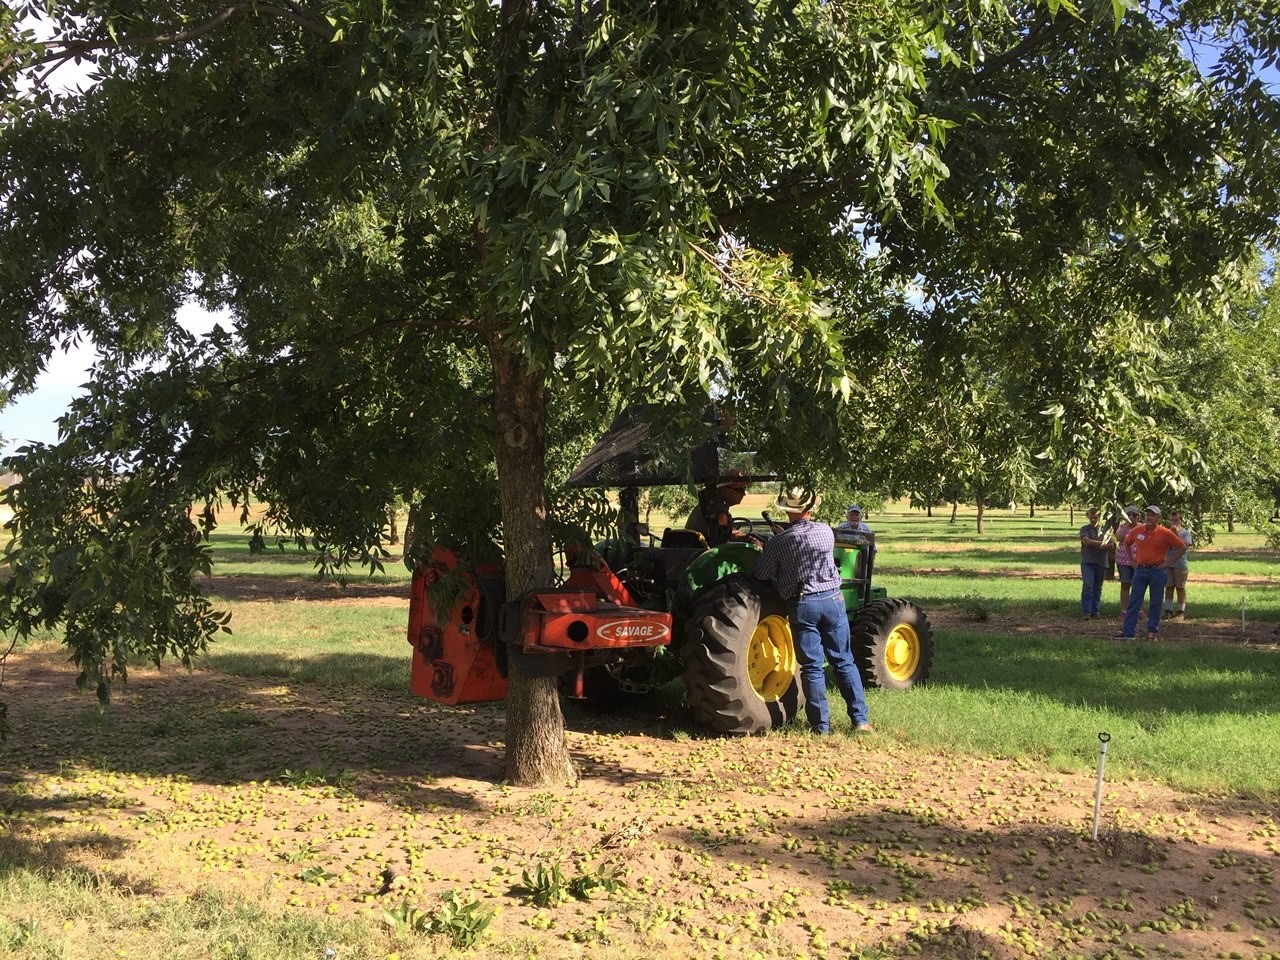 Growers to Learn How to Thin Their Crop Load at Upcoming Pecan Field Day Hosted by OSU